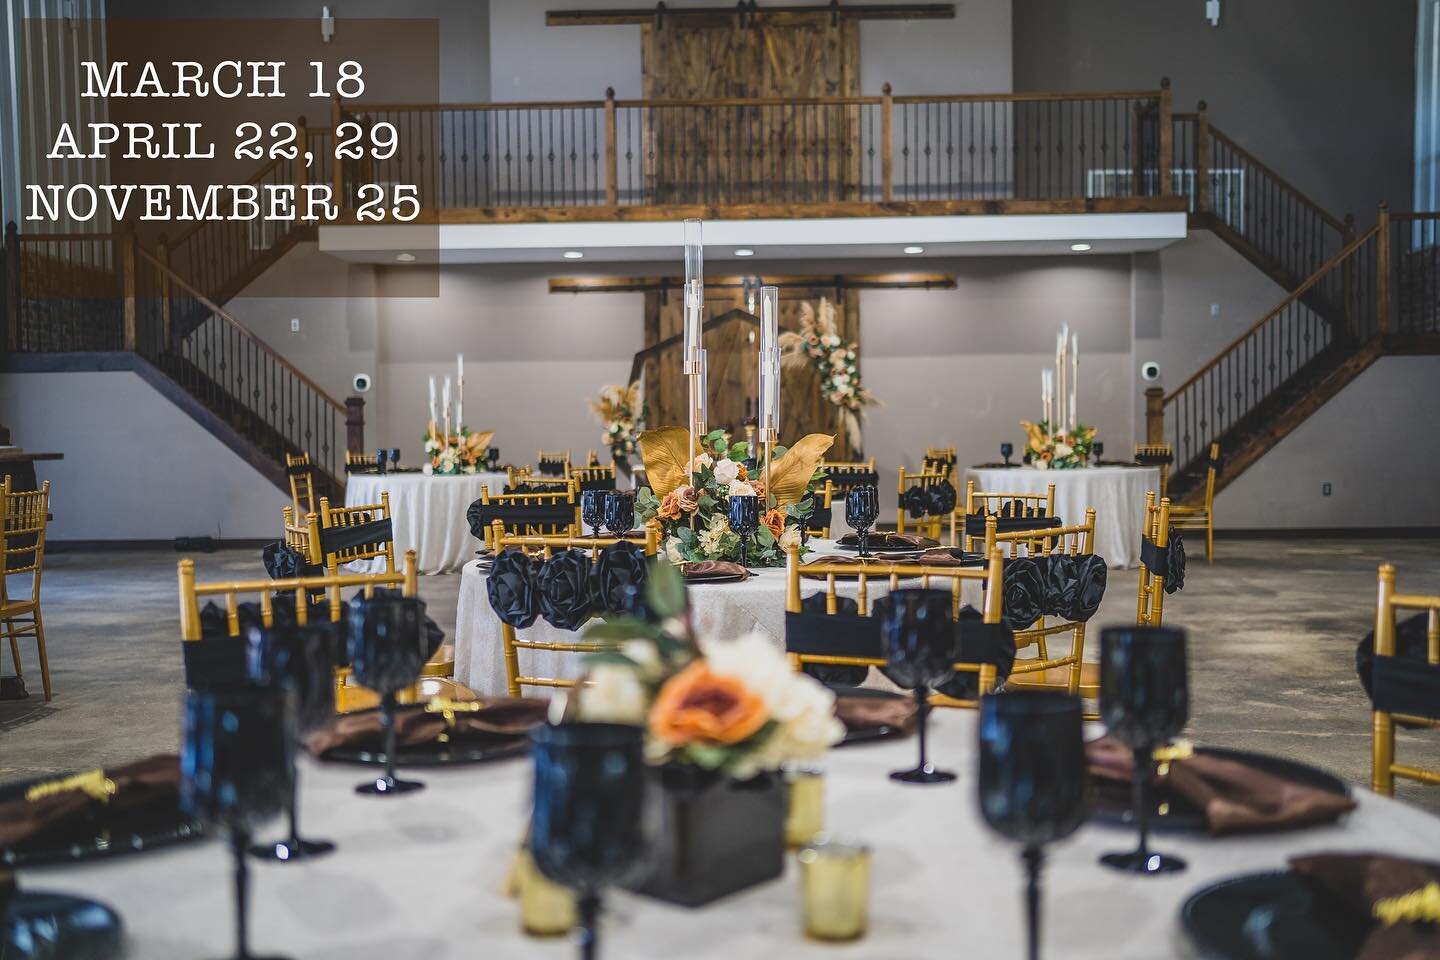 2023 weddings are right around the corner. We only have 4 prime Saturdays remaining! We would love to host you on your special day! Co tact us to schedule your tour today!
#BBPF
#mississippiweddingvenue